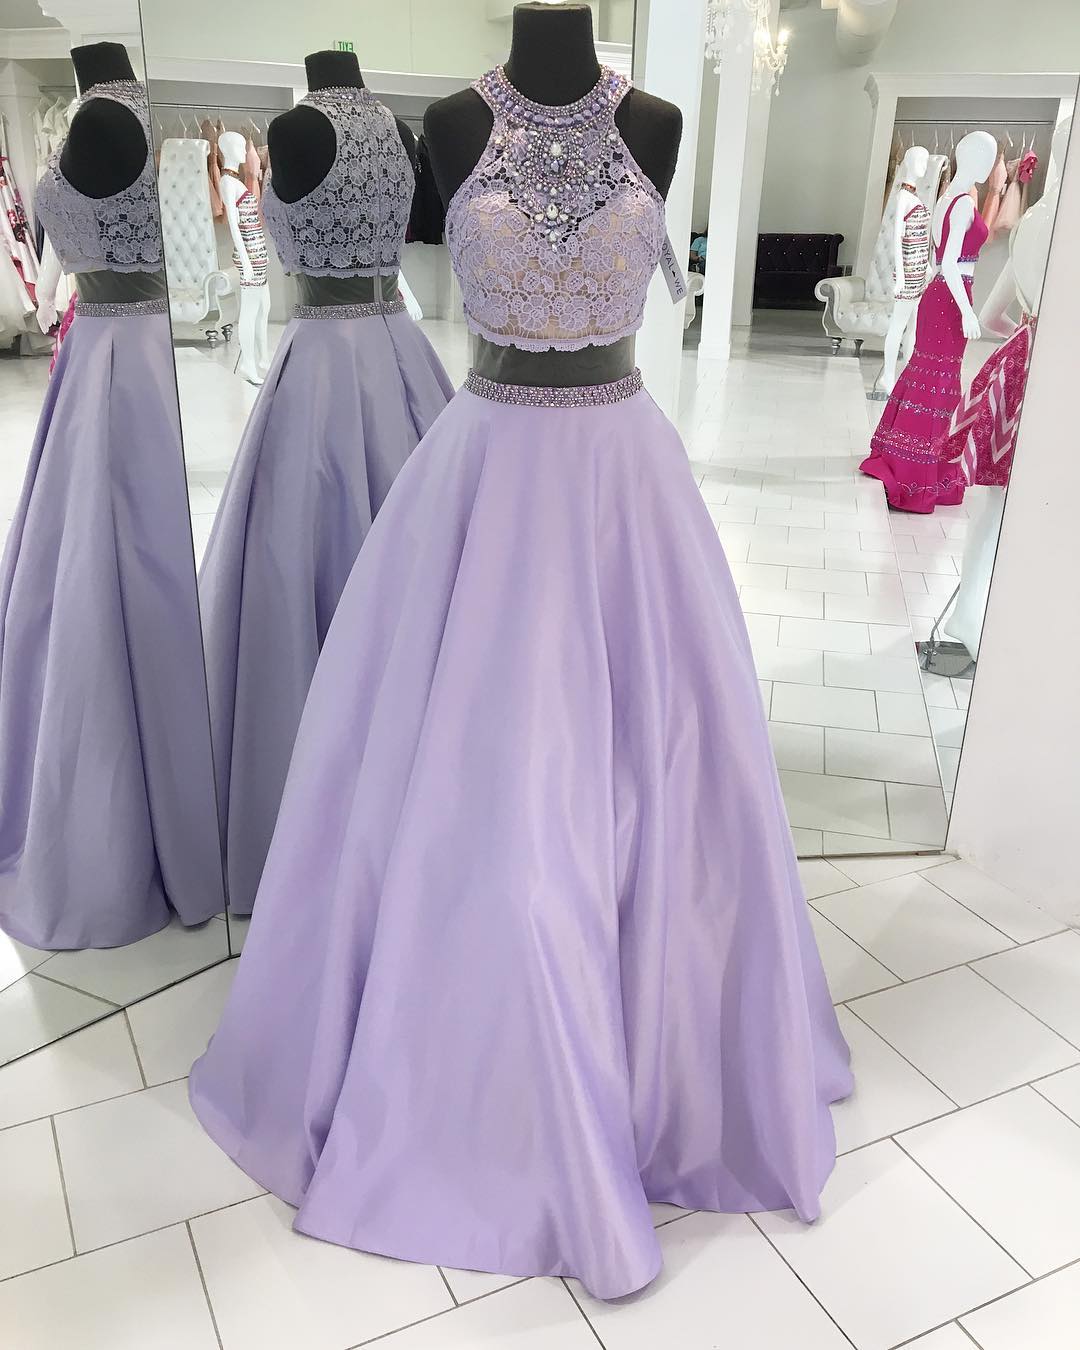 Elegant Lavender Lace Beaded High Neck Prom Dress,two-piece Long Prom Dress